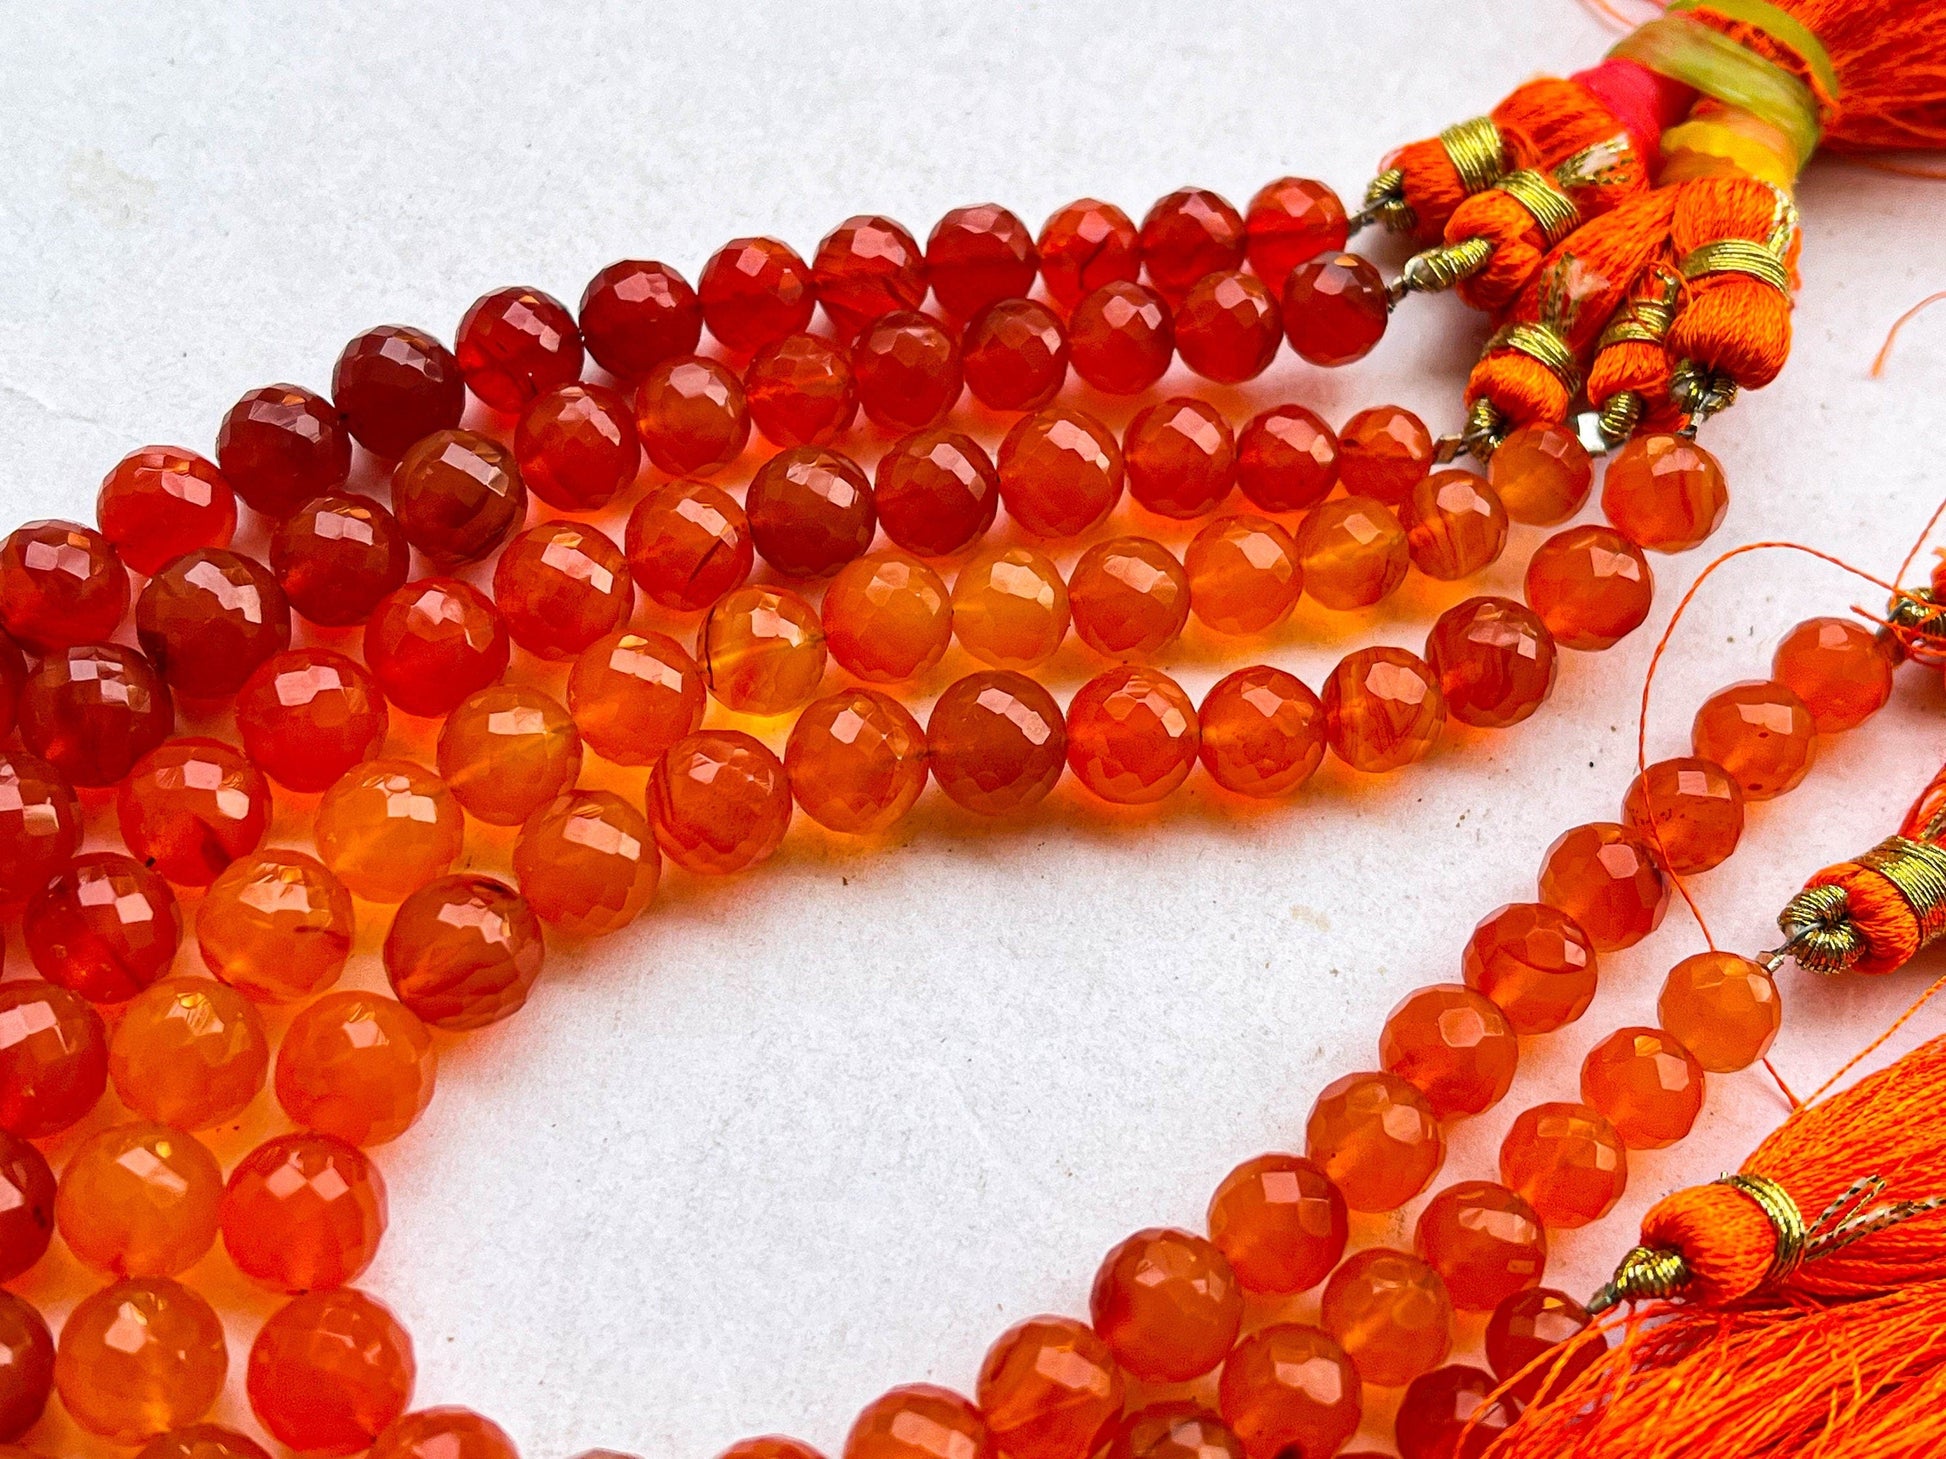 Carnelian Faceted Spherical Beads | 6MM to 8MM | 8 Inch Beadsforyourjewelry